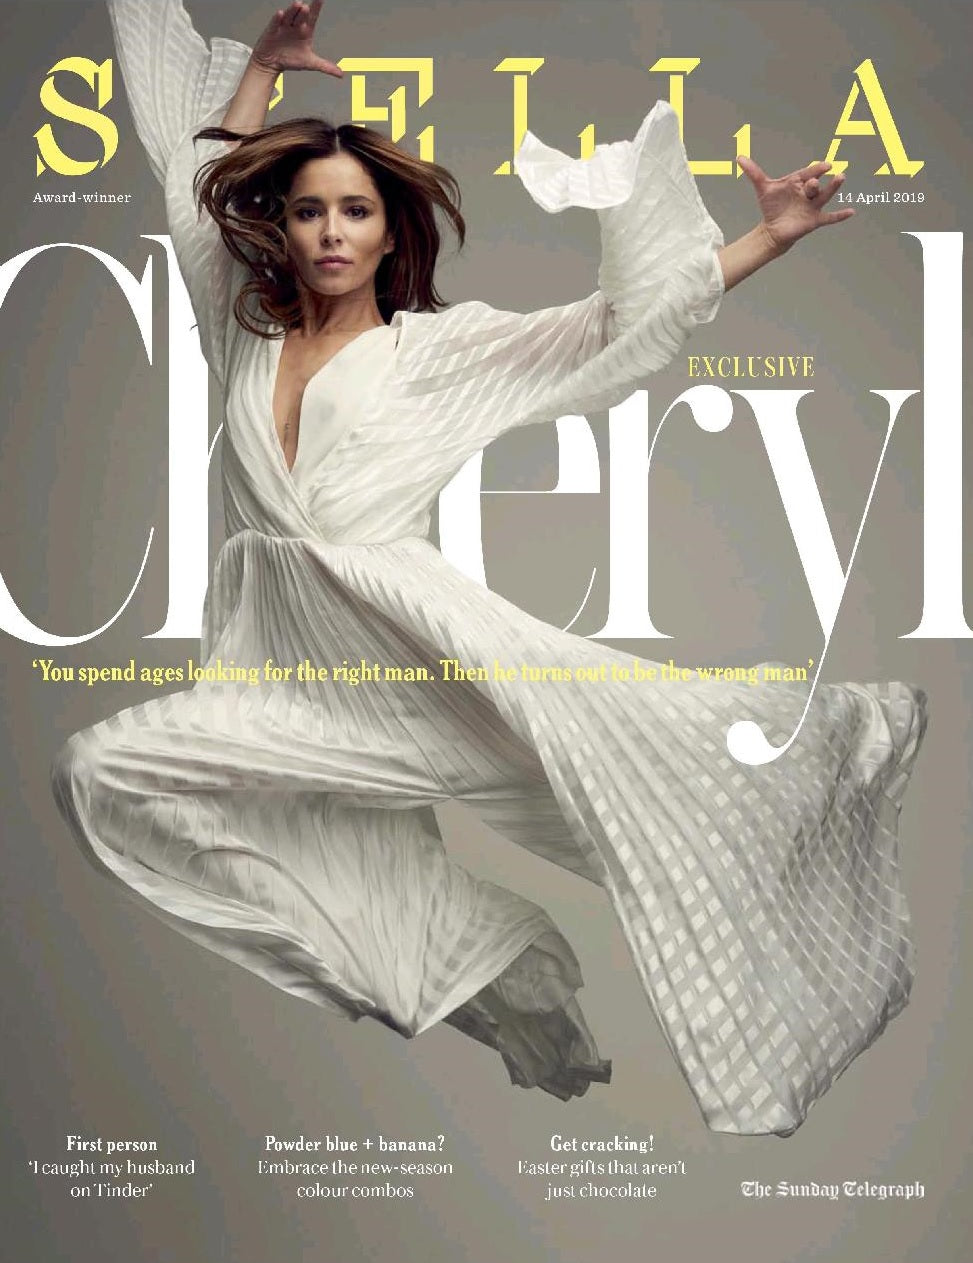 Stella Magazine features Cheryl in SS19 on their cover